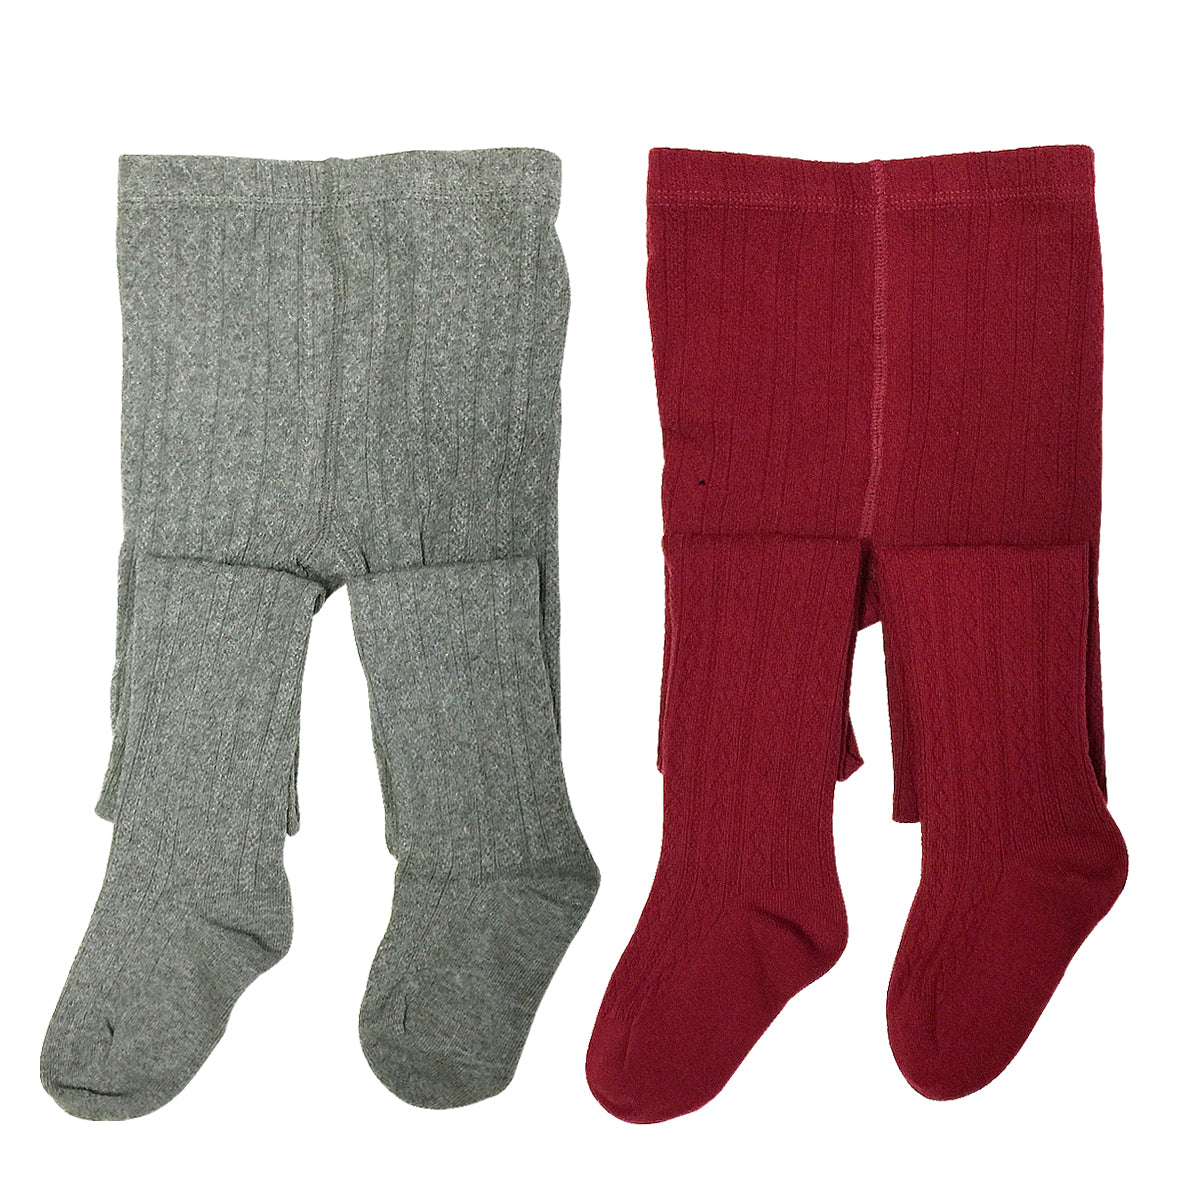 Wrapables Burgundy and Gray Cotton Diamond Weave Knit Tights for Girls